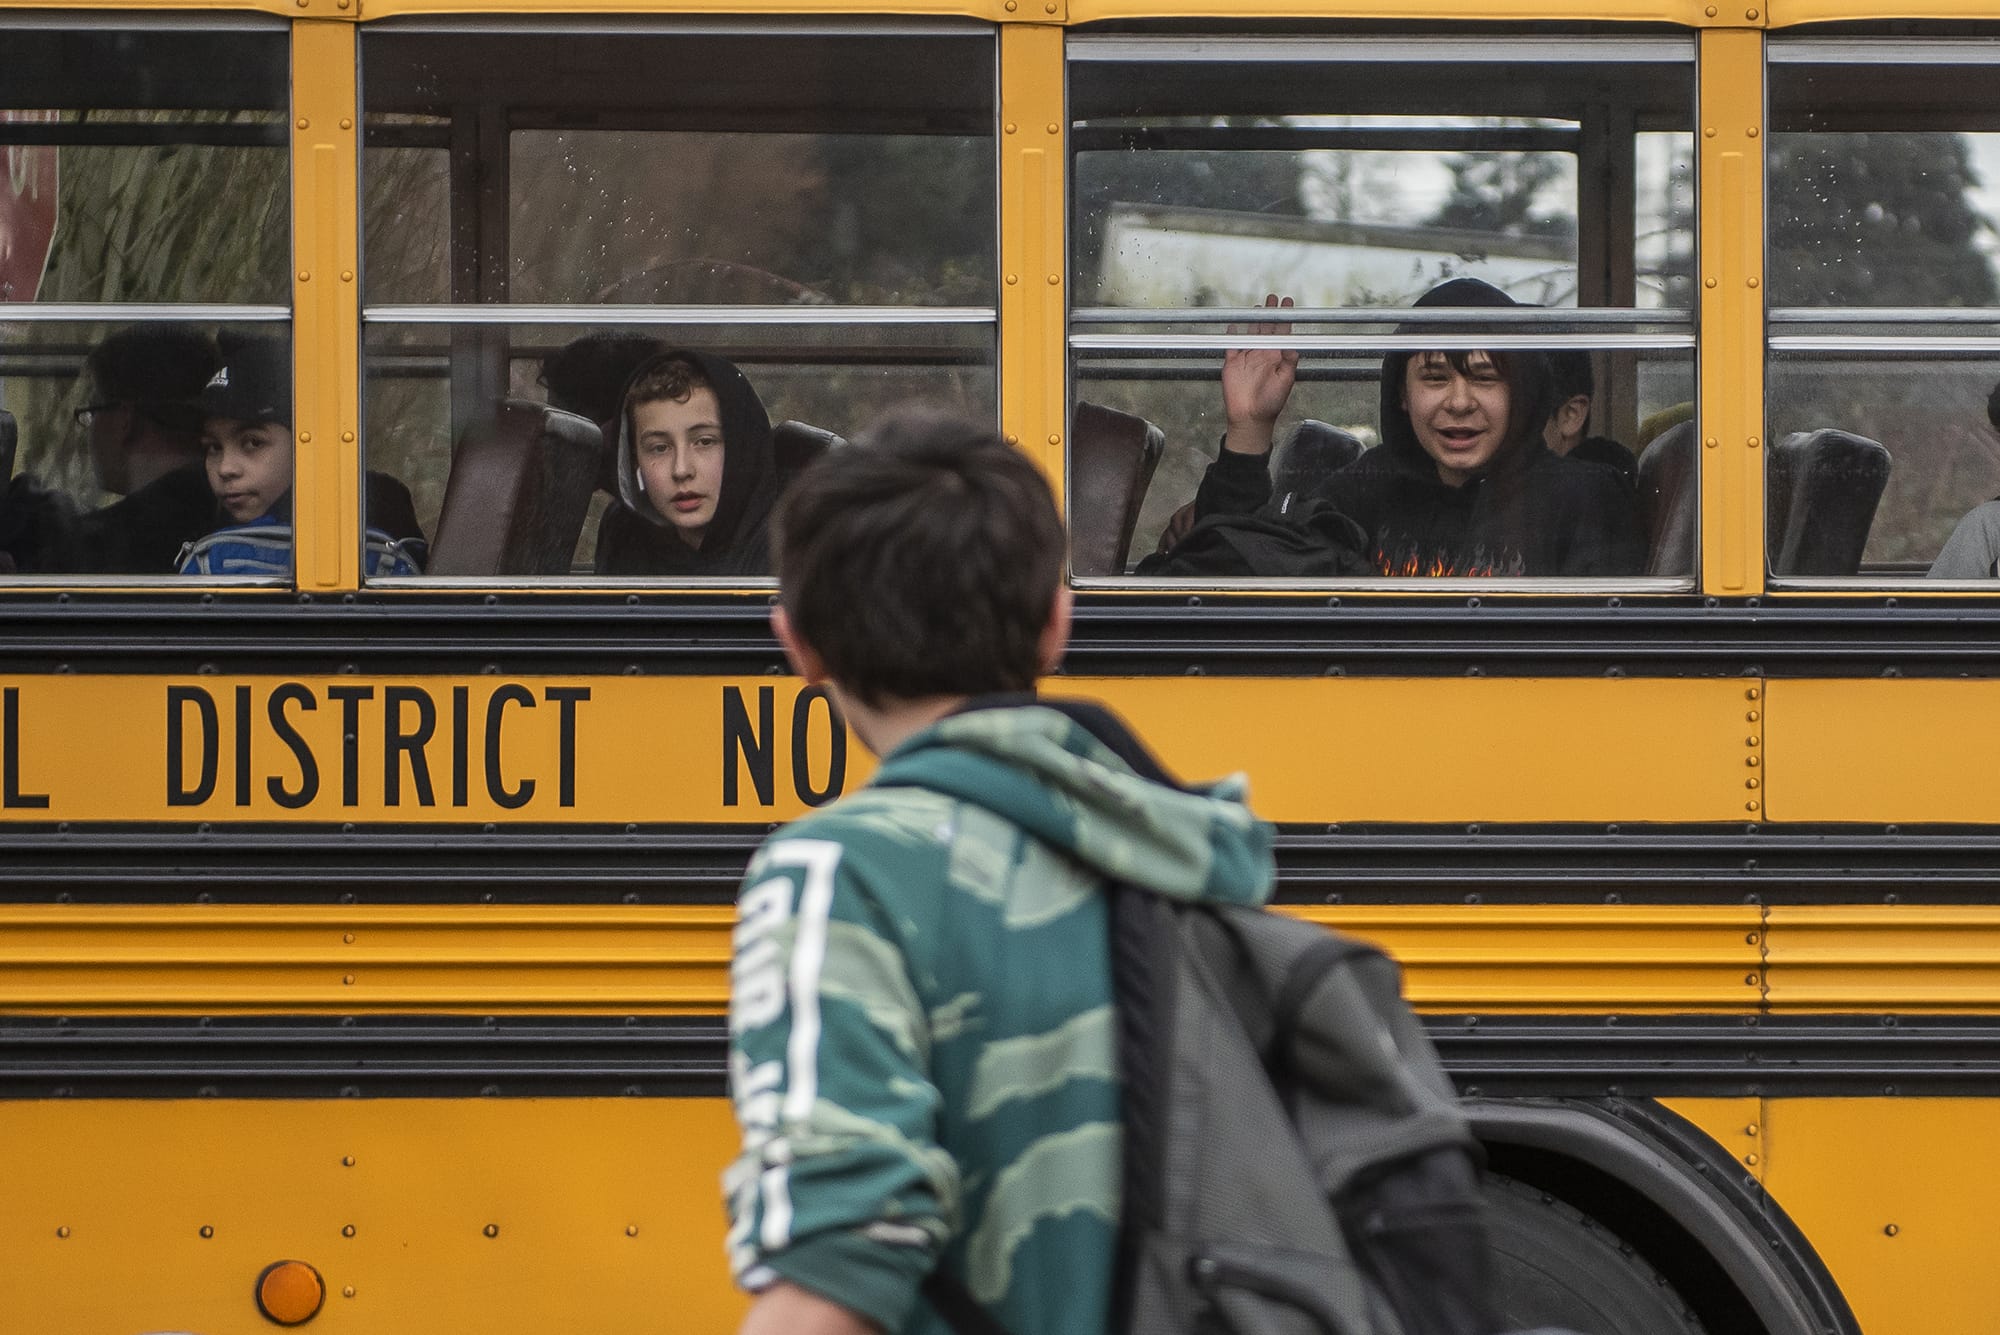 Students wave to Owen Watts, foreground, as their bus pulls away from Covington Middle School on Friday afternoon, March 13, 2020.